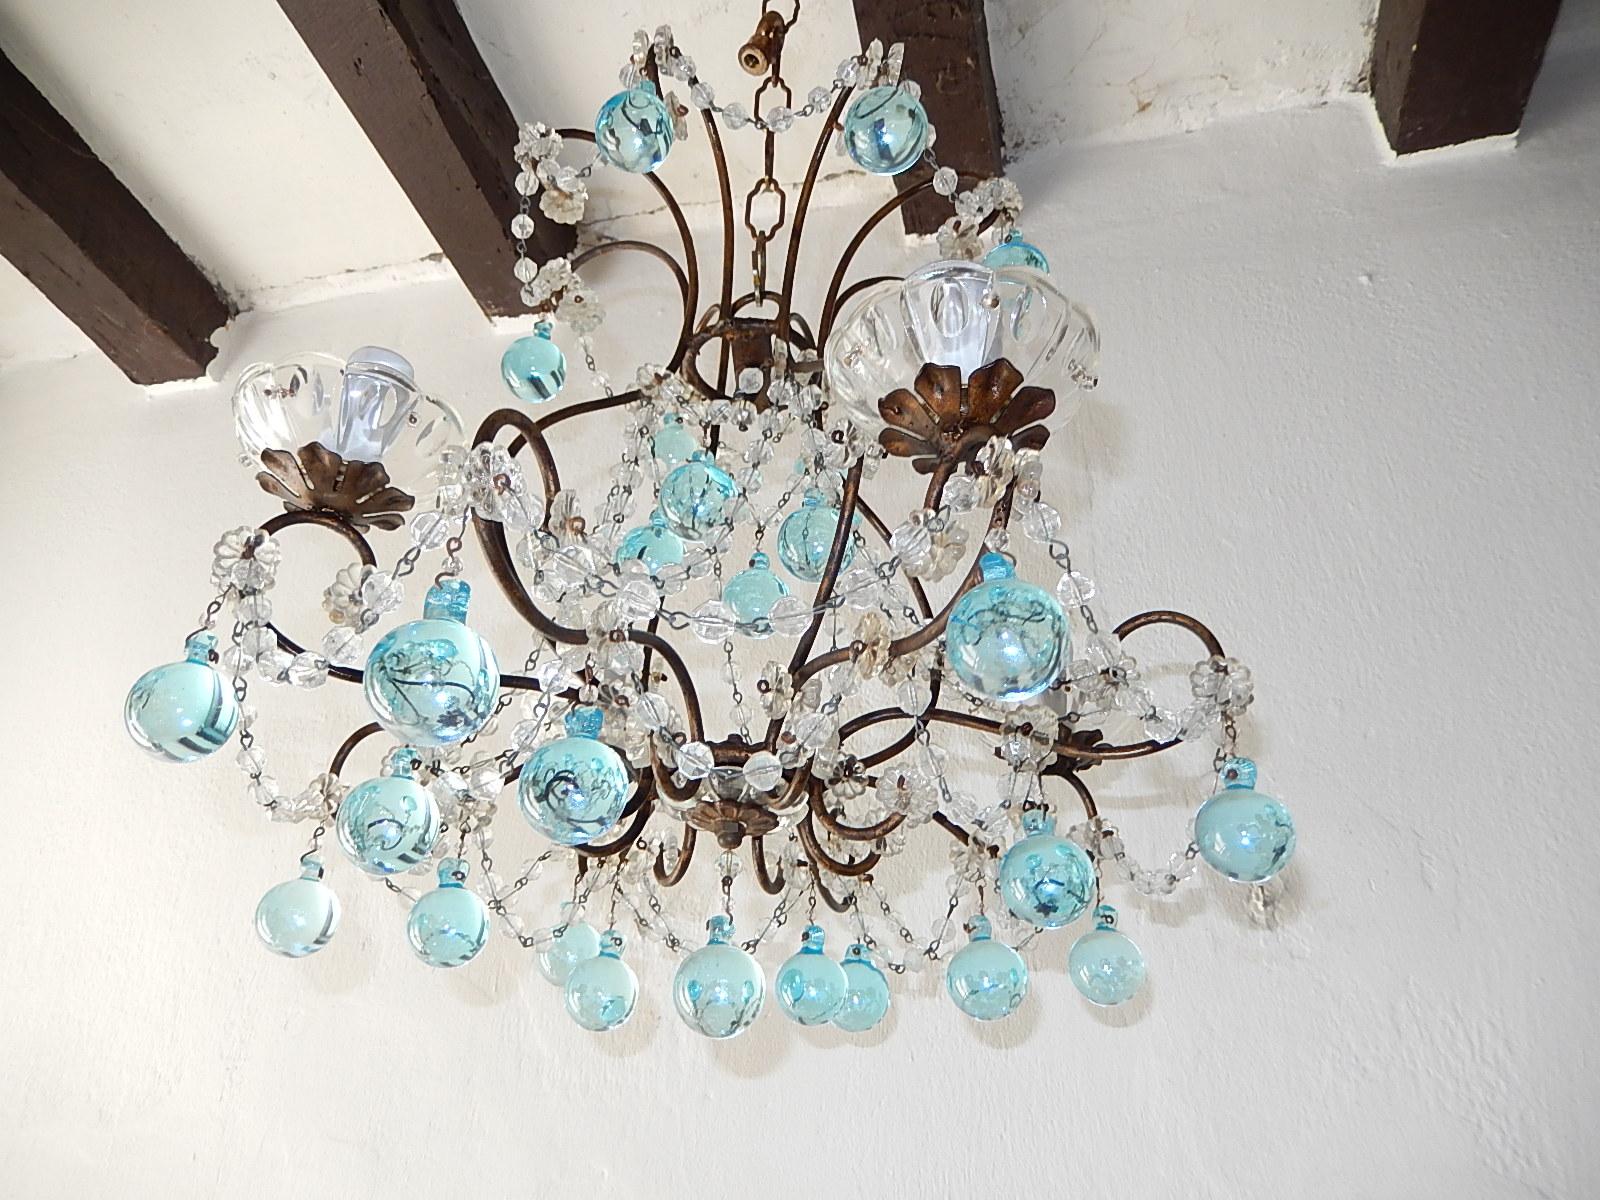 Housing 4 lights sitting in crystal bobeches, dripping with crystal balls. Swags of crystal and florets throughout. Murano aqua blue drops. Adding 8 inches of original chain and canopy. will be re-wired with certified sockets appropriate for country